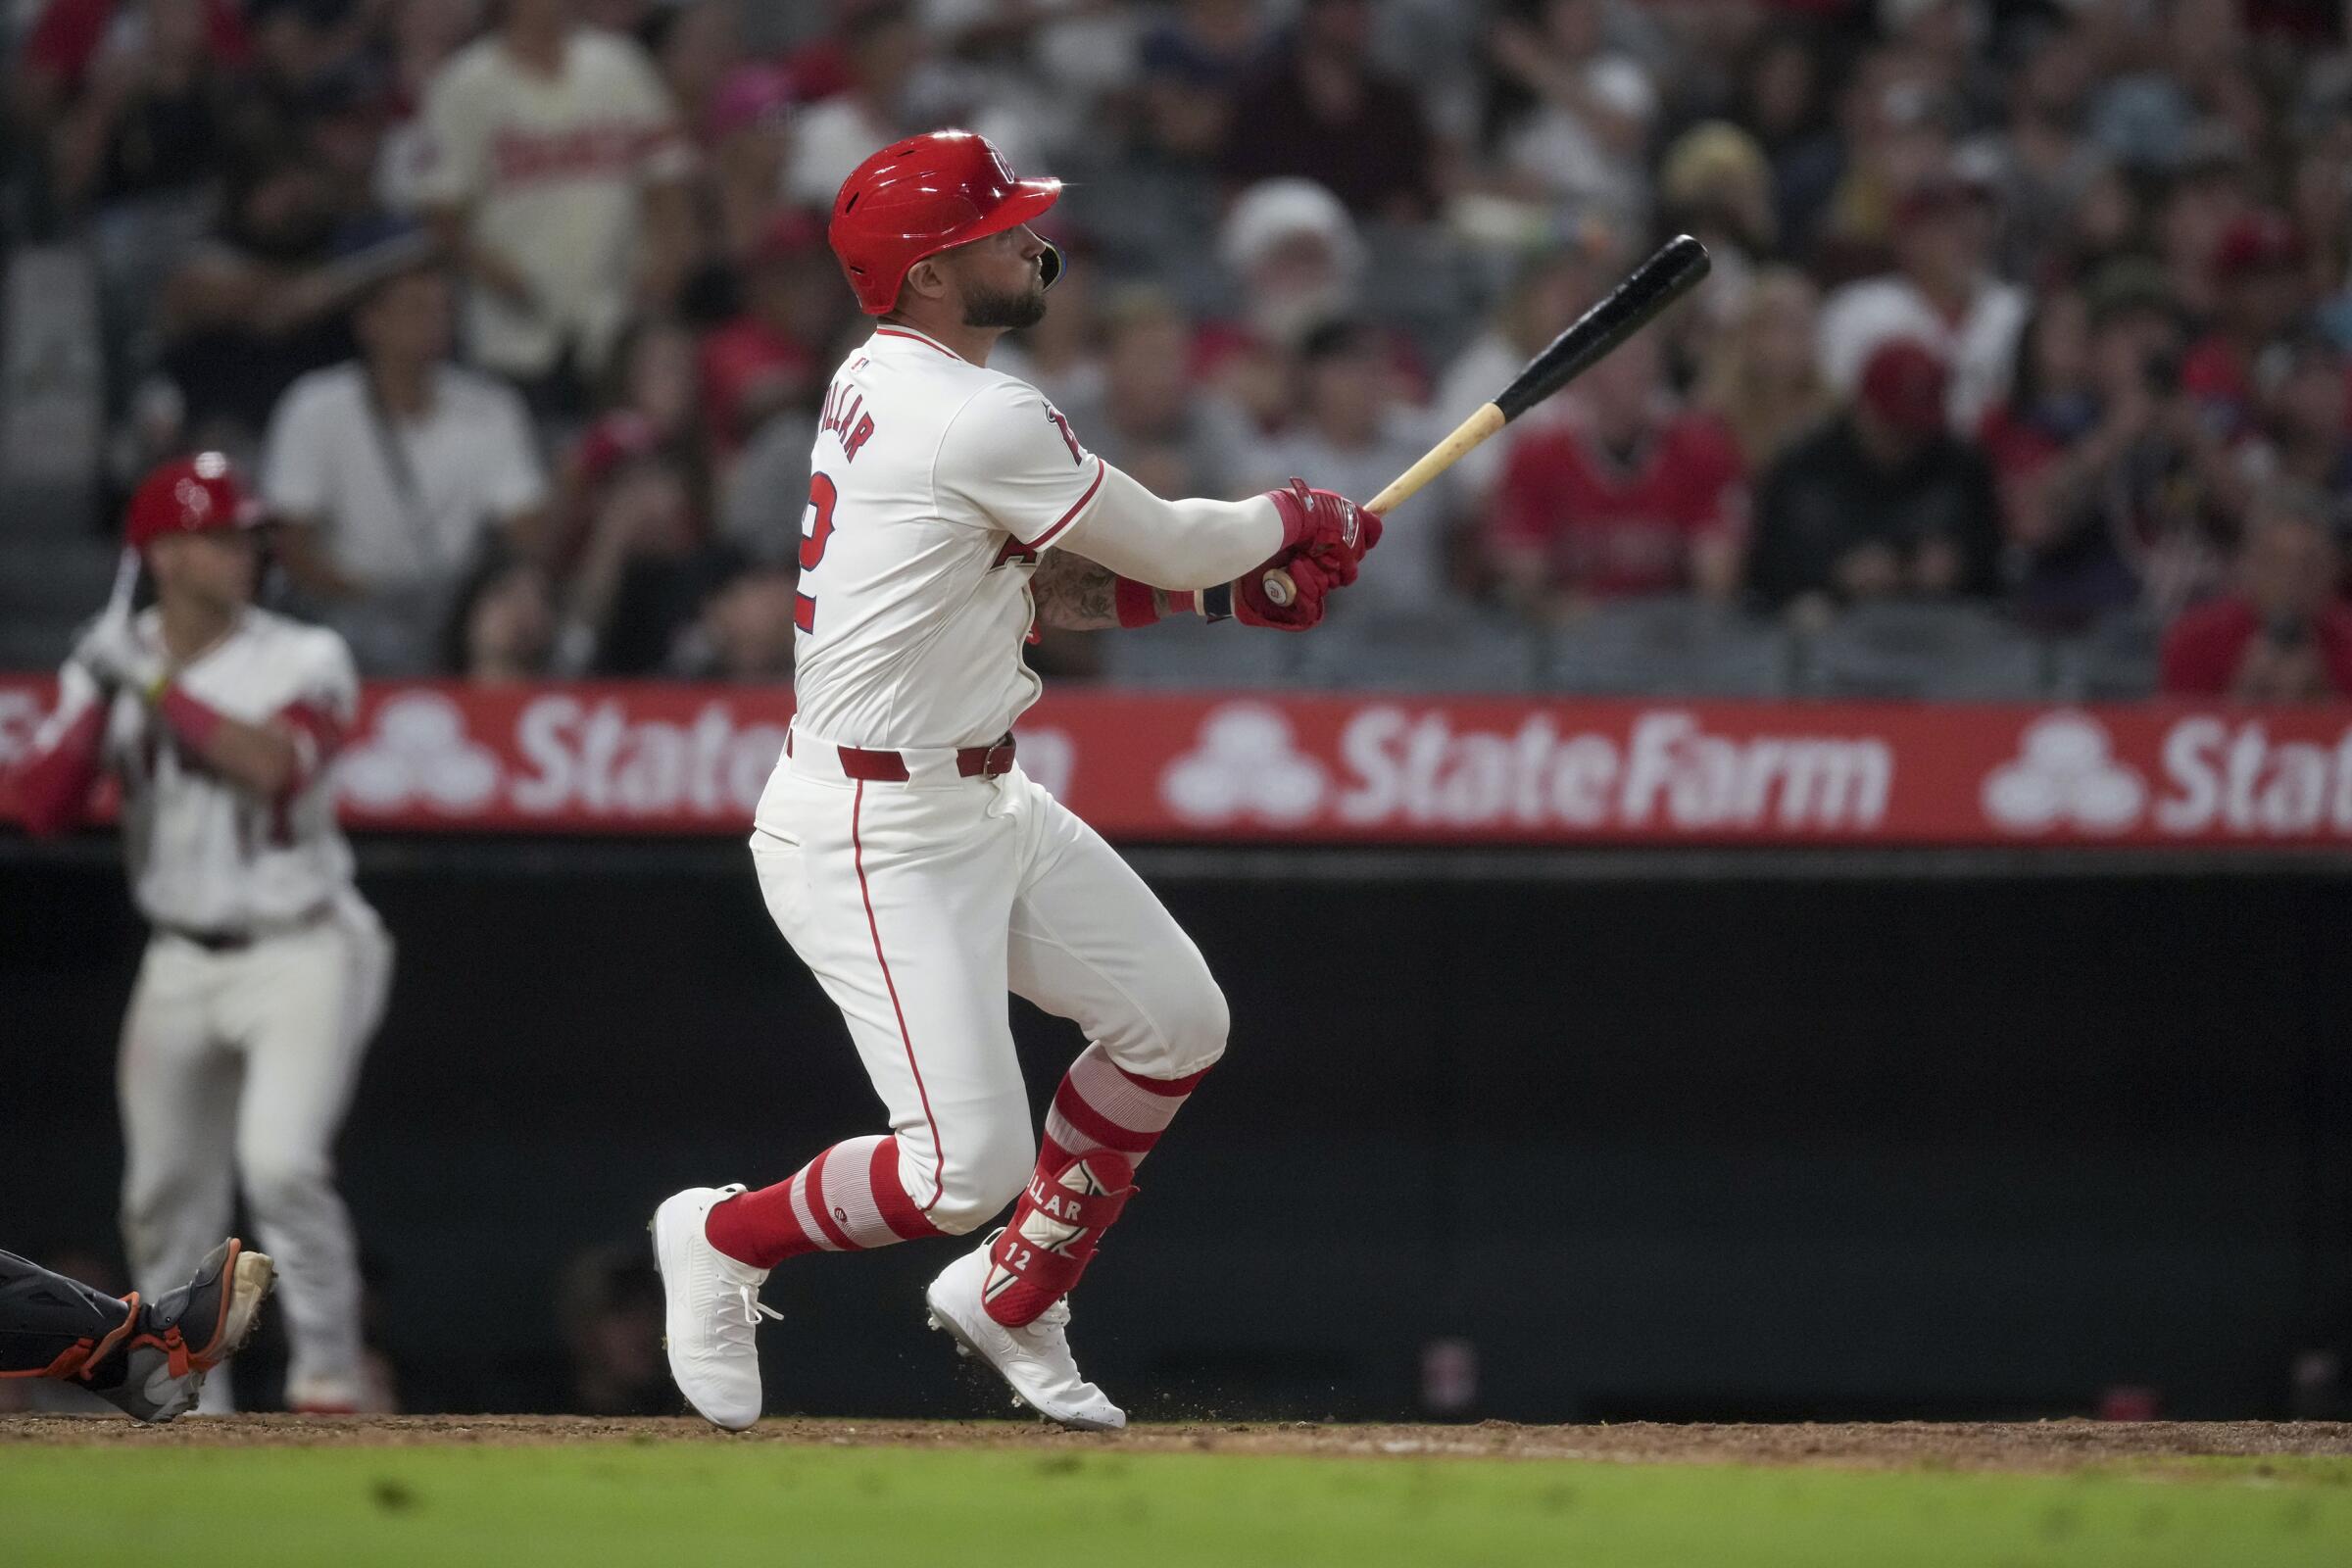 Kevin Pillar hits a walk-off single in the Angels' 6-5 comeback win over the Detroit Tigers at Angel Stadium.